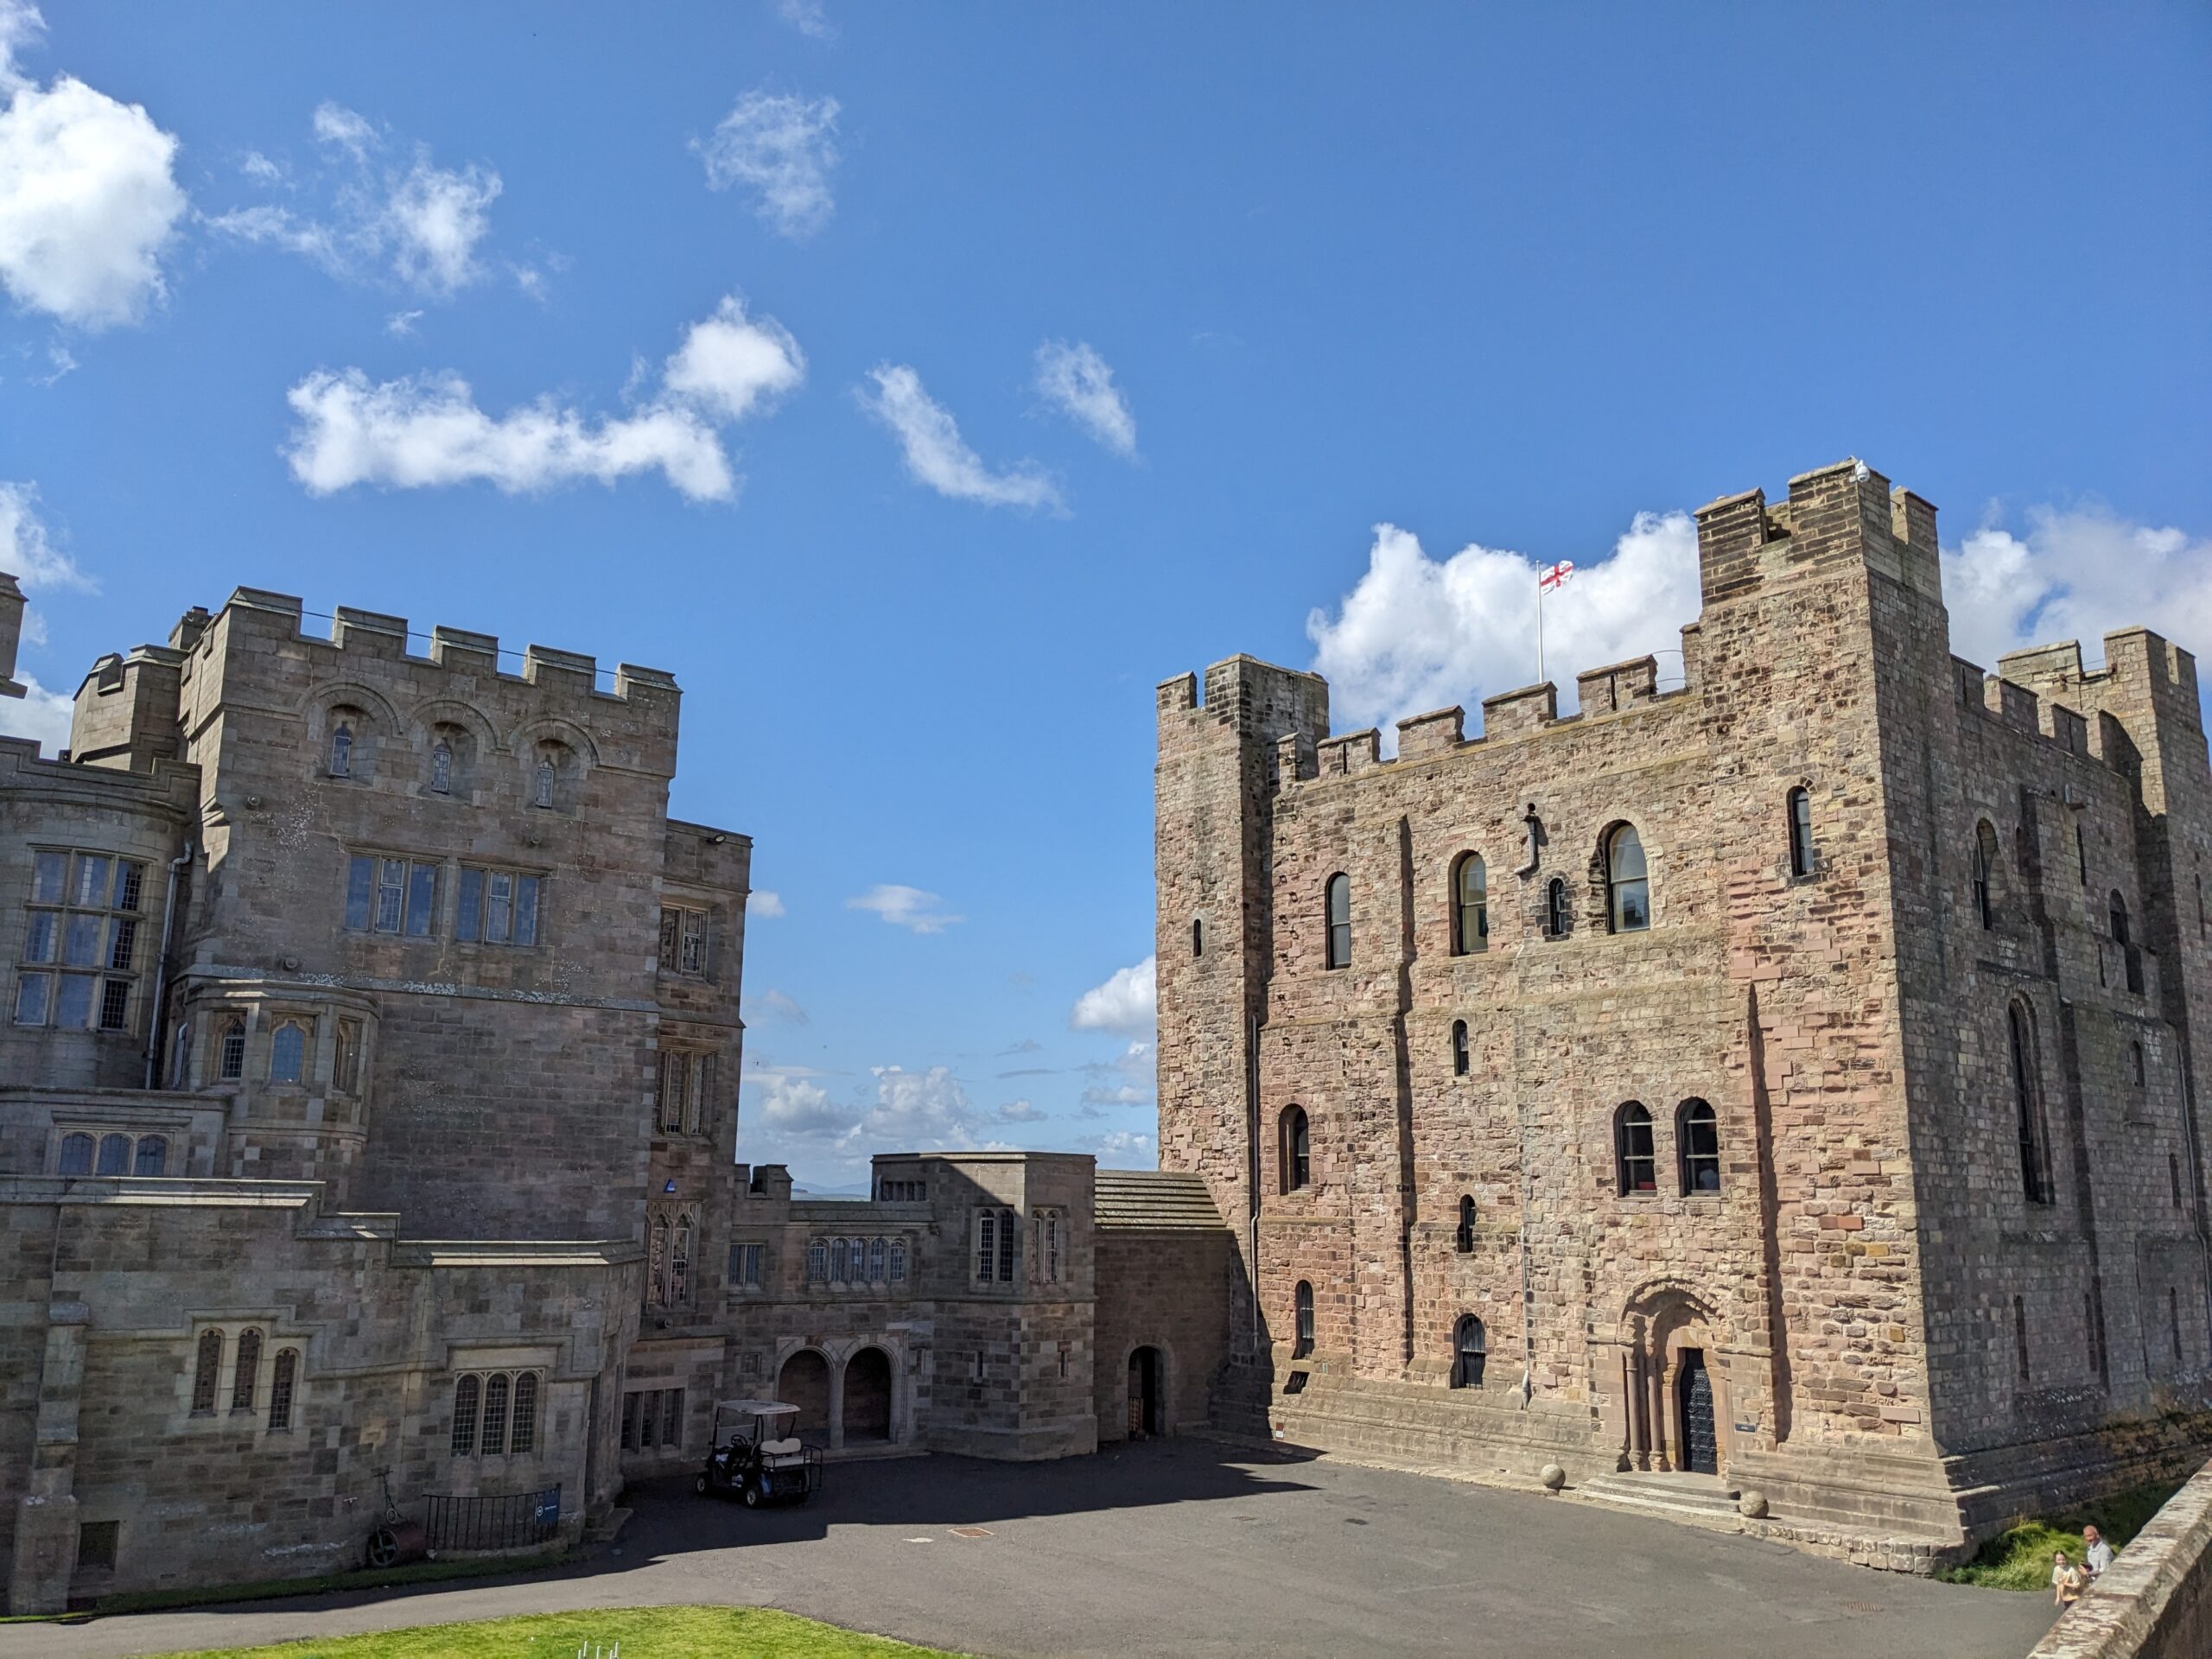 Day trip ideas from Scotland: Northumberland